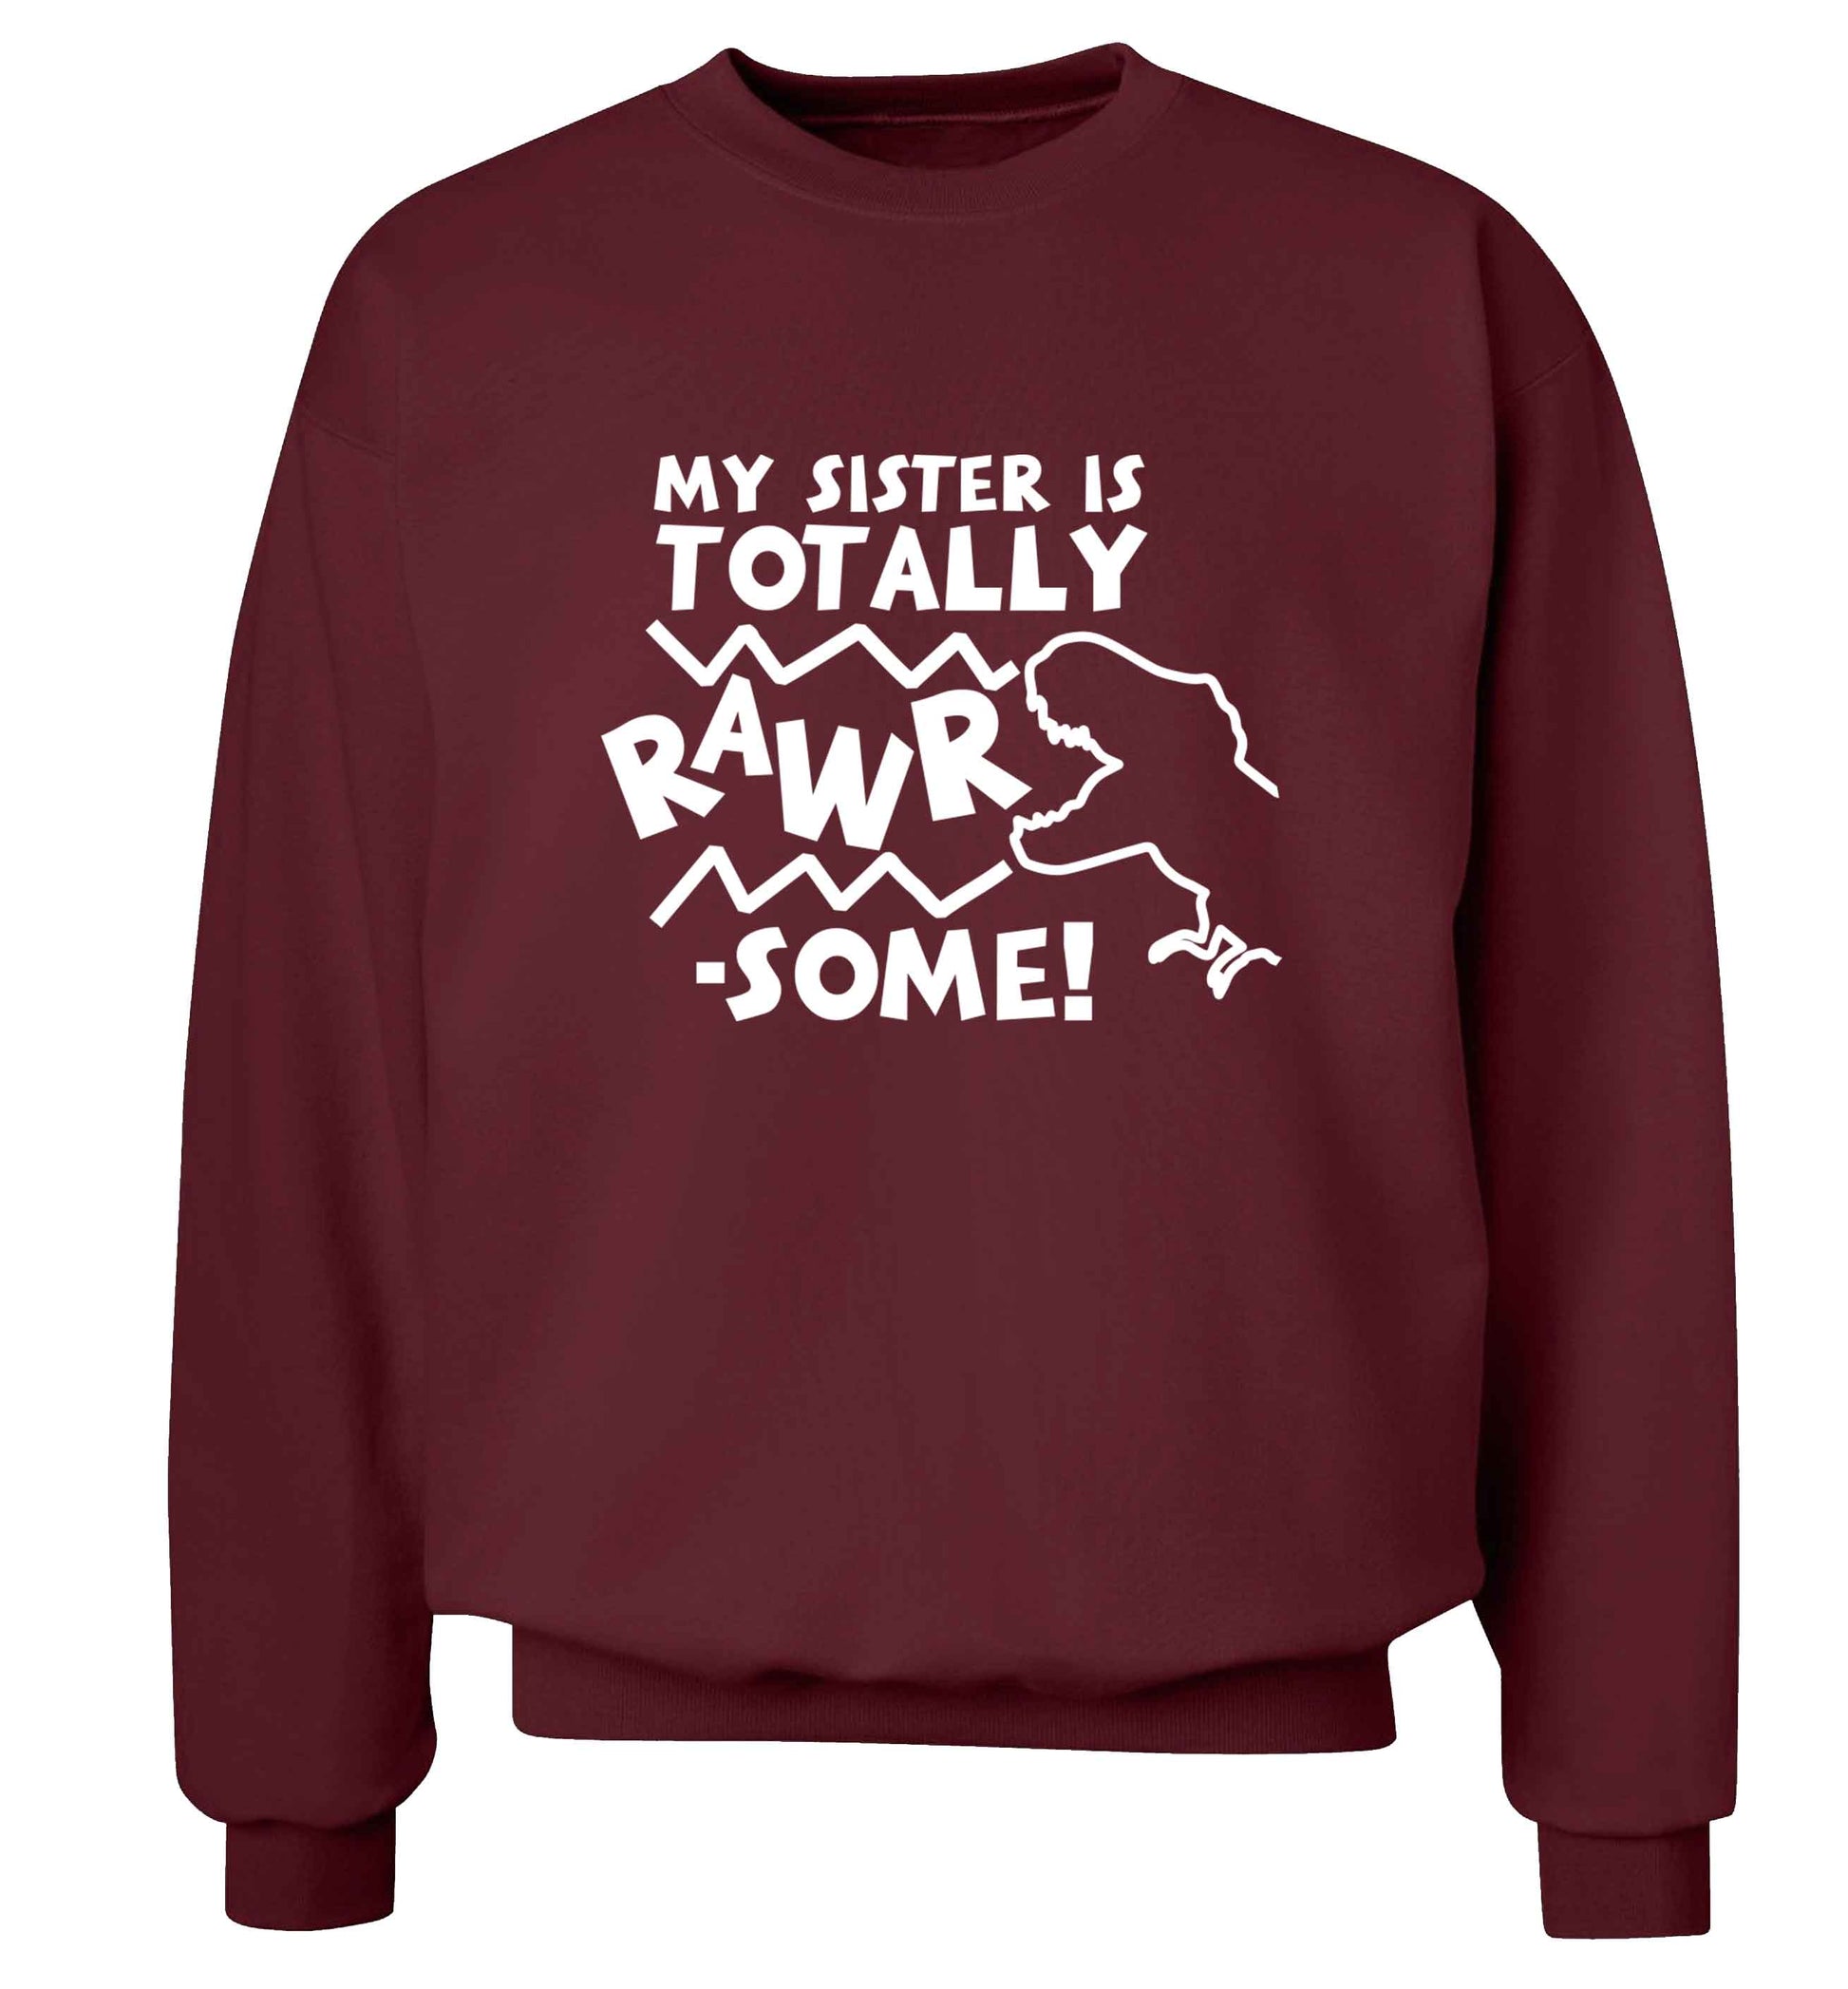 My sister is totally rawrsome adult's unisex maroon sweater 2XL